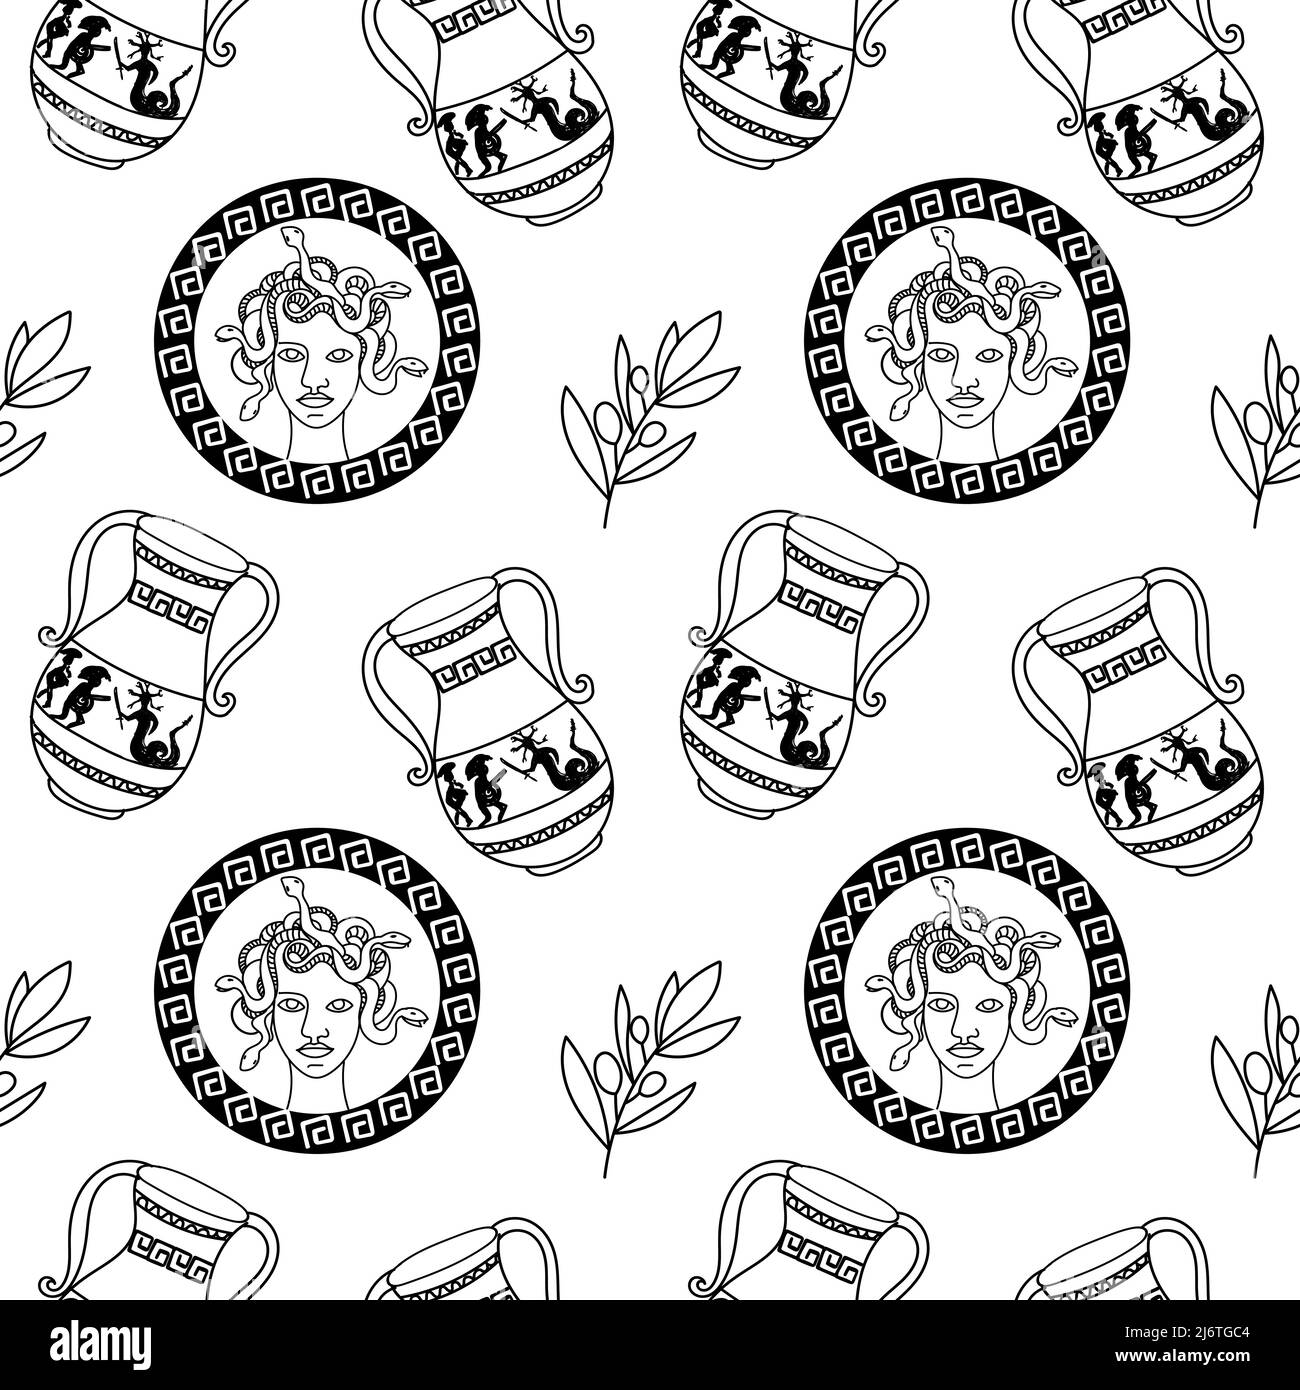 Seamless coin pattern with an image of Medusa Gorgon. Hand-drawn doodle elements in sketch style. Vases with the feat of Perseus. Sprigs of laurel on Stock Vector